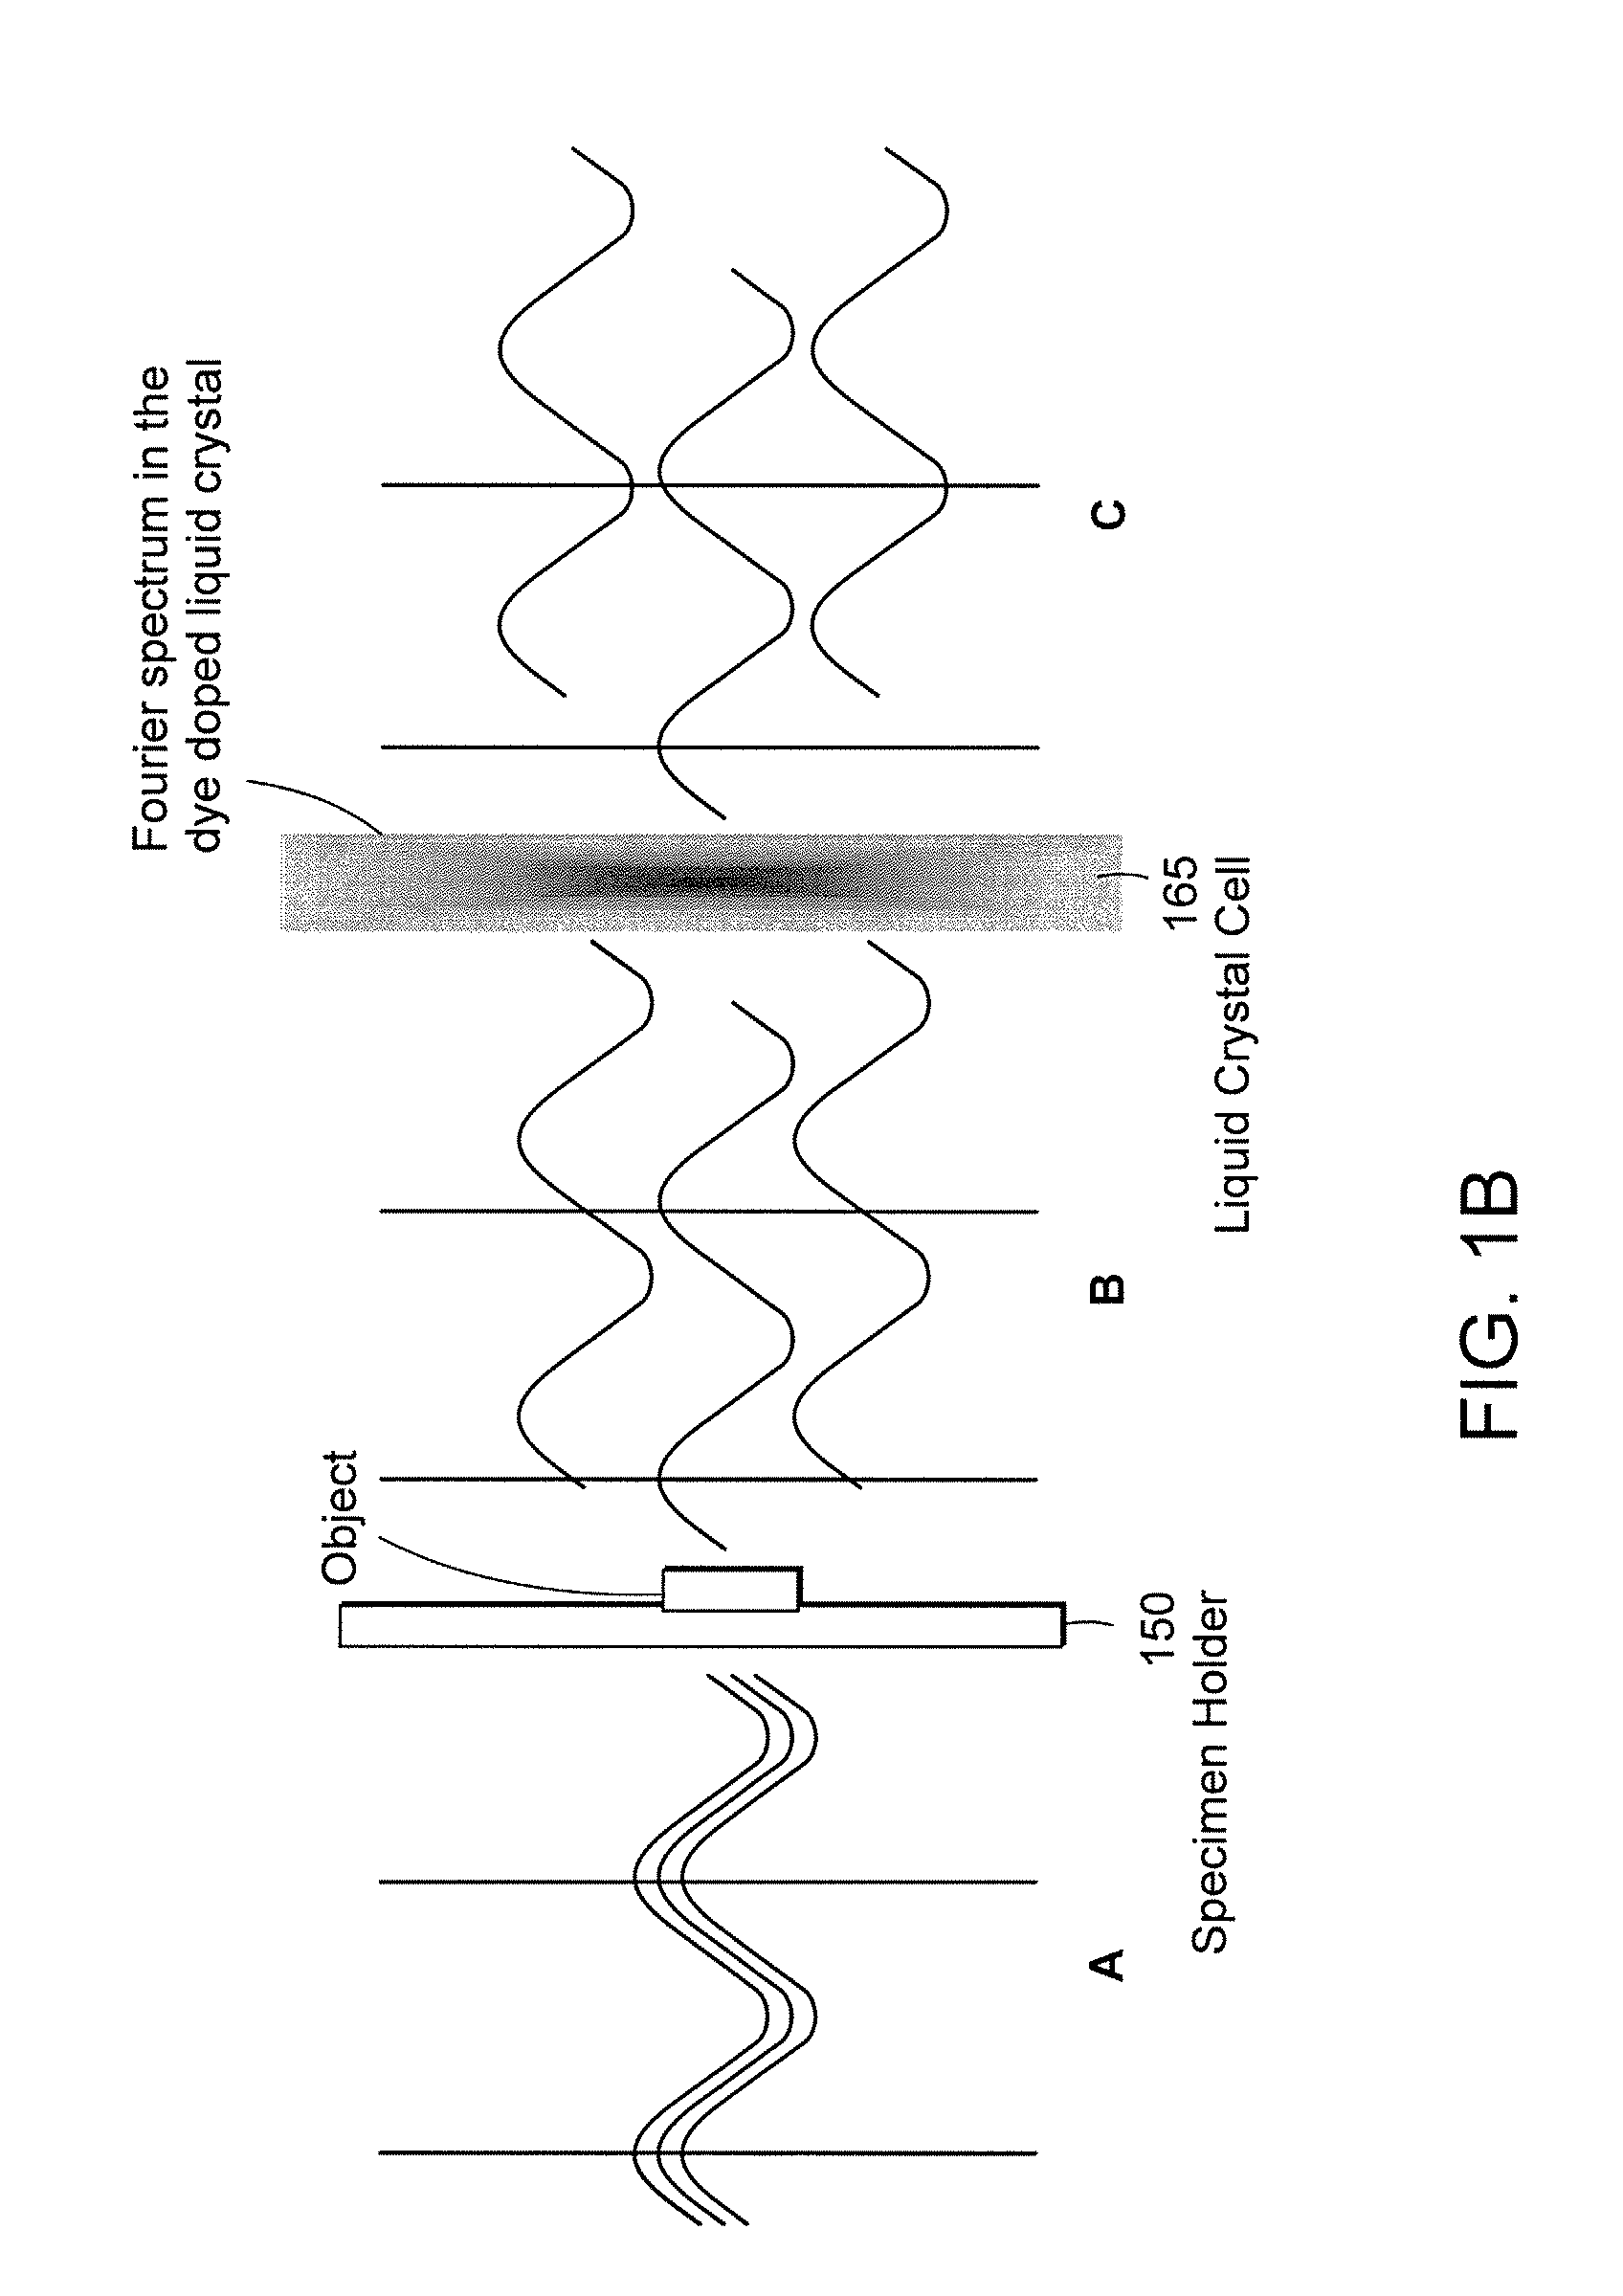 Systems and methods of all-optical fourier phase contrast imaging using dye doped liquid crystals